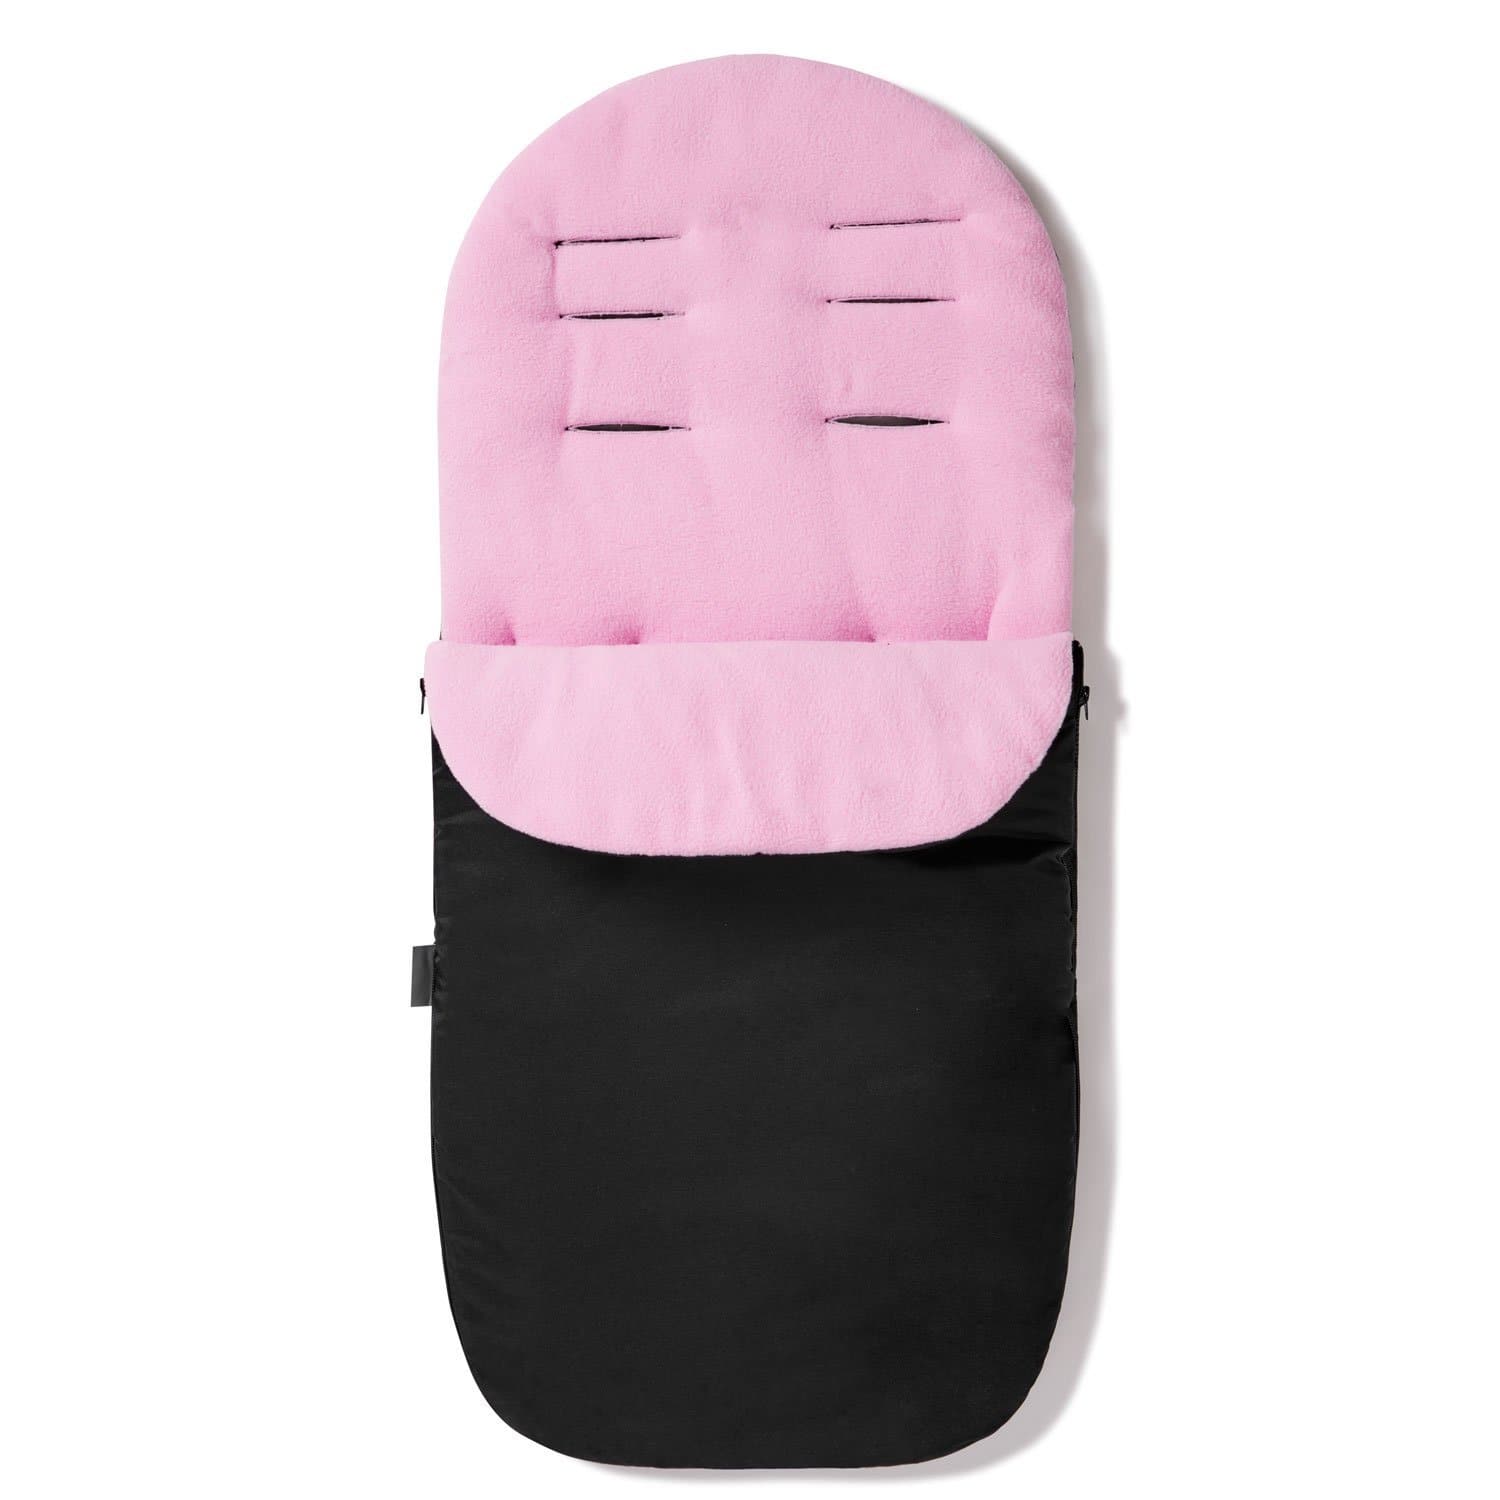 Footmuff / Cosy Toes Compatible with Brevi - Light Pink / Fits All Models | For Your Little One